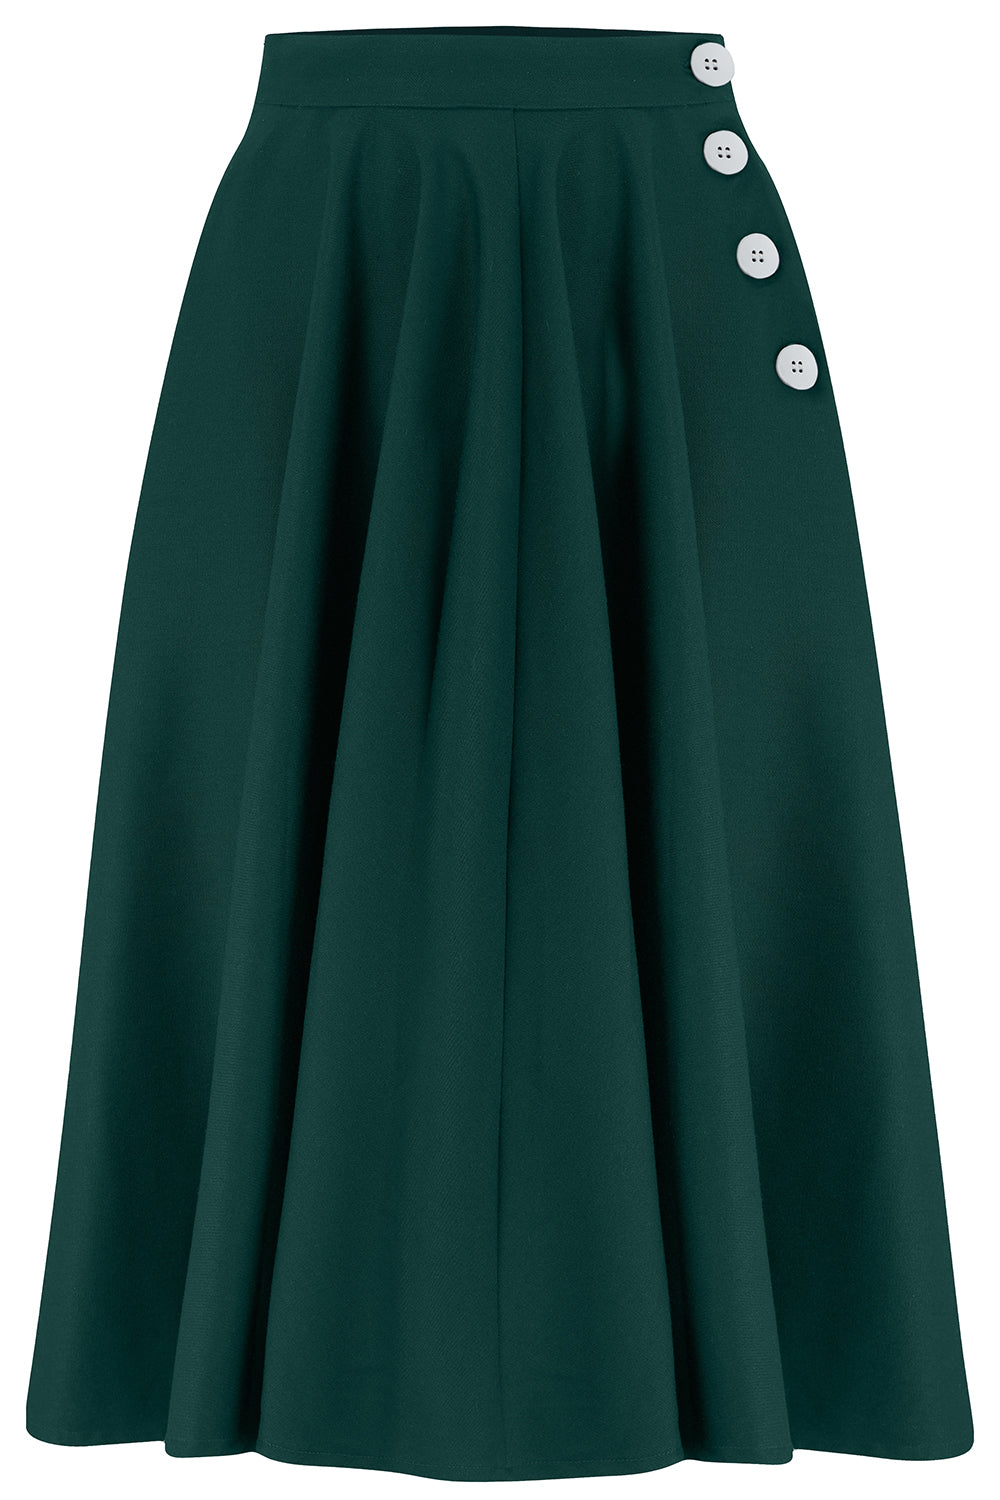 "Sylvia" Tailored Skirt in Solid Green , Classic & Authentic 1940s Vintage Inspired Style - True and authentic vintage style clothing, inspired by the Classic styles of CC41 , WW2 and the fun 1950s RocknRoll era, for everyday wear plus events like Goodwood Revival, Twinwood Festival and Viva Las Vegas Rockabilly Weekend Rock n Romance The Seamstress Of Bloomsbury